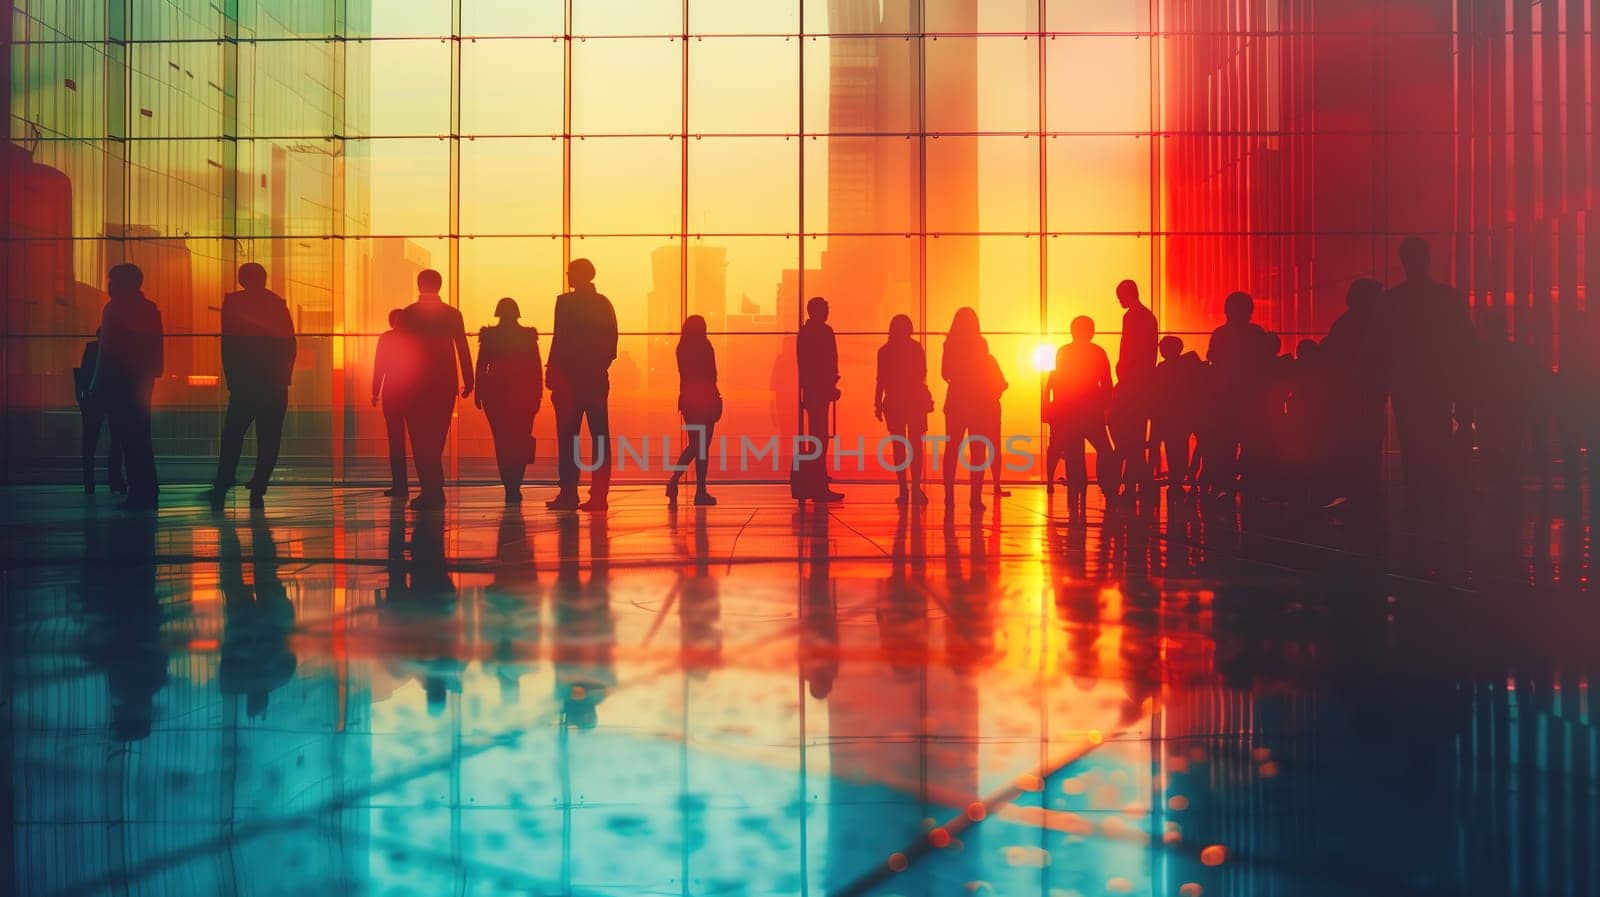 A group of corporate professionals is silhouetted against the vibrant hues of a sunset, reflecting off the glossy floors and transparent walls of a contemporary glass building, conveying a sense of business collaboration and ending of the workday.